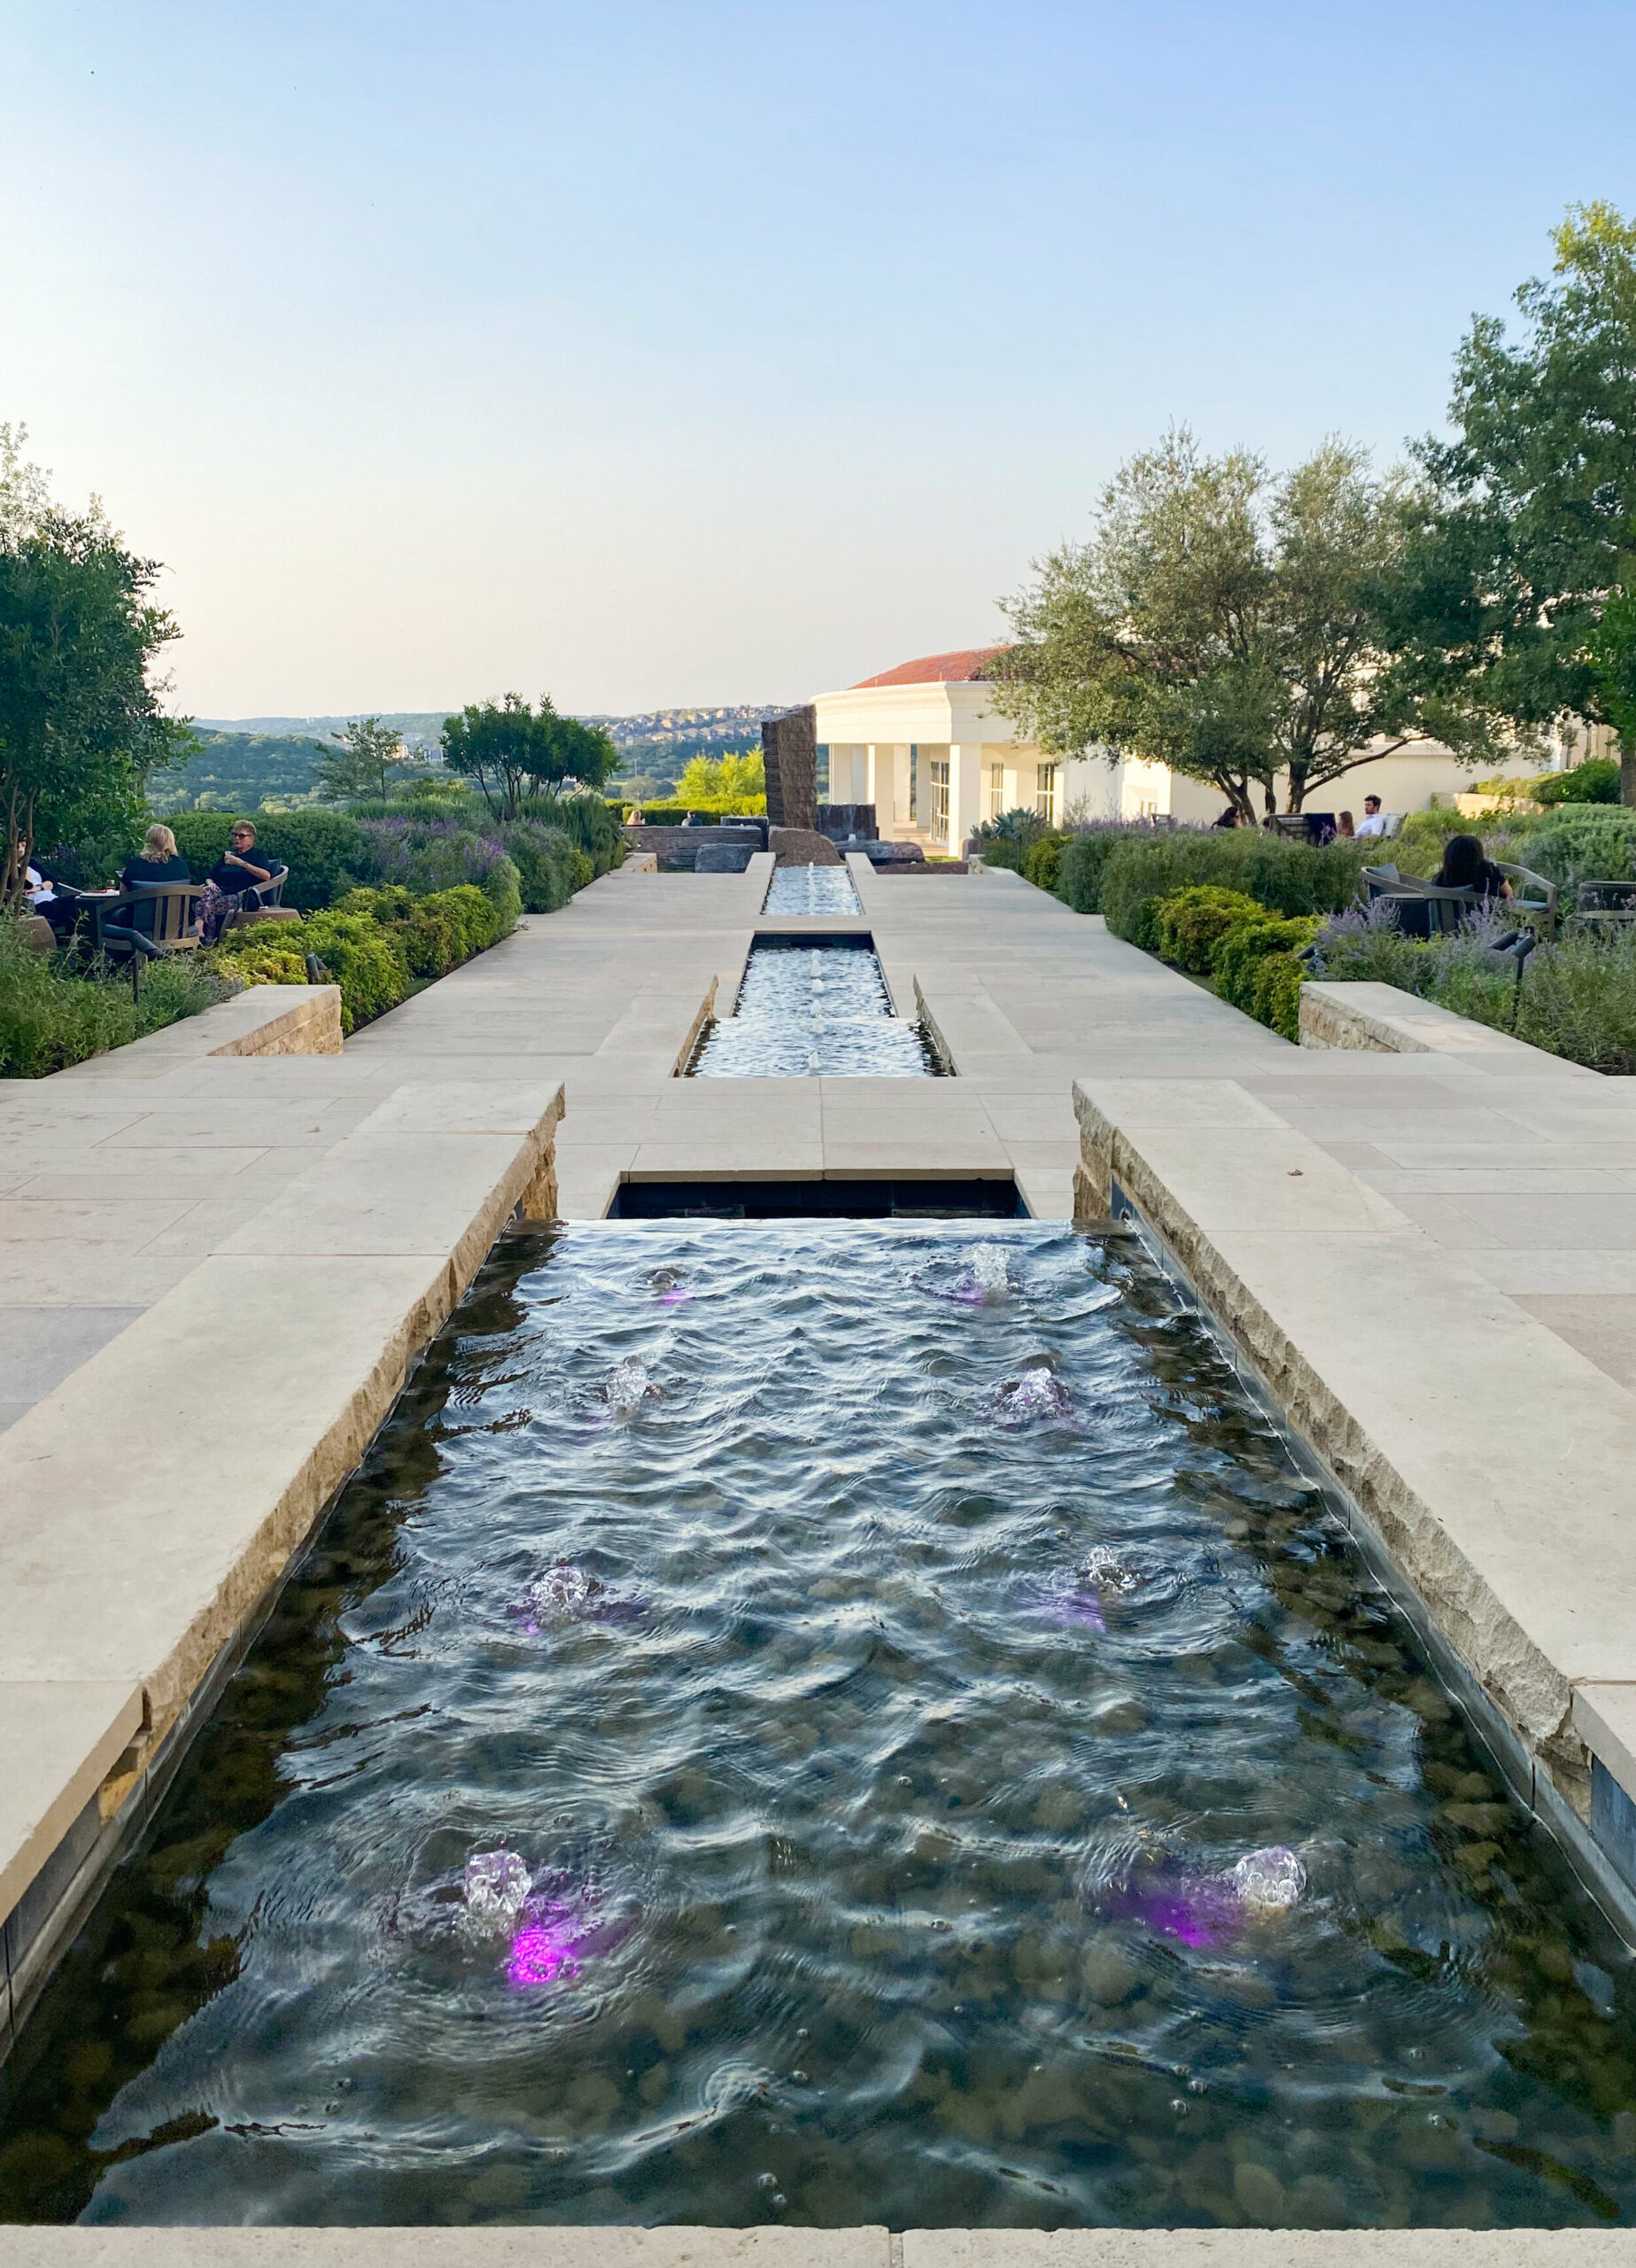 La Cantera Resort & Spa is one of the best places to stay in San